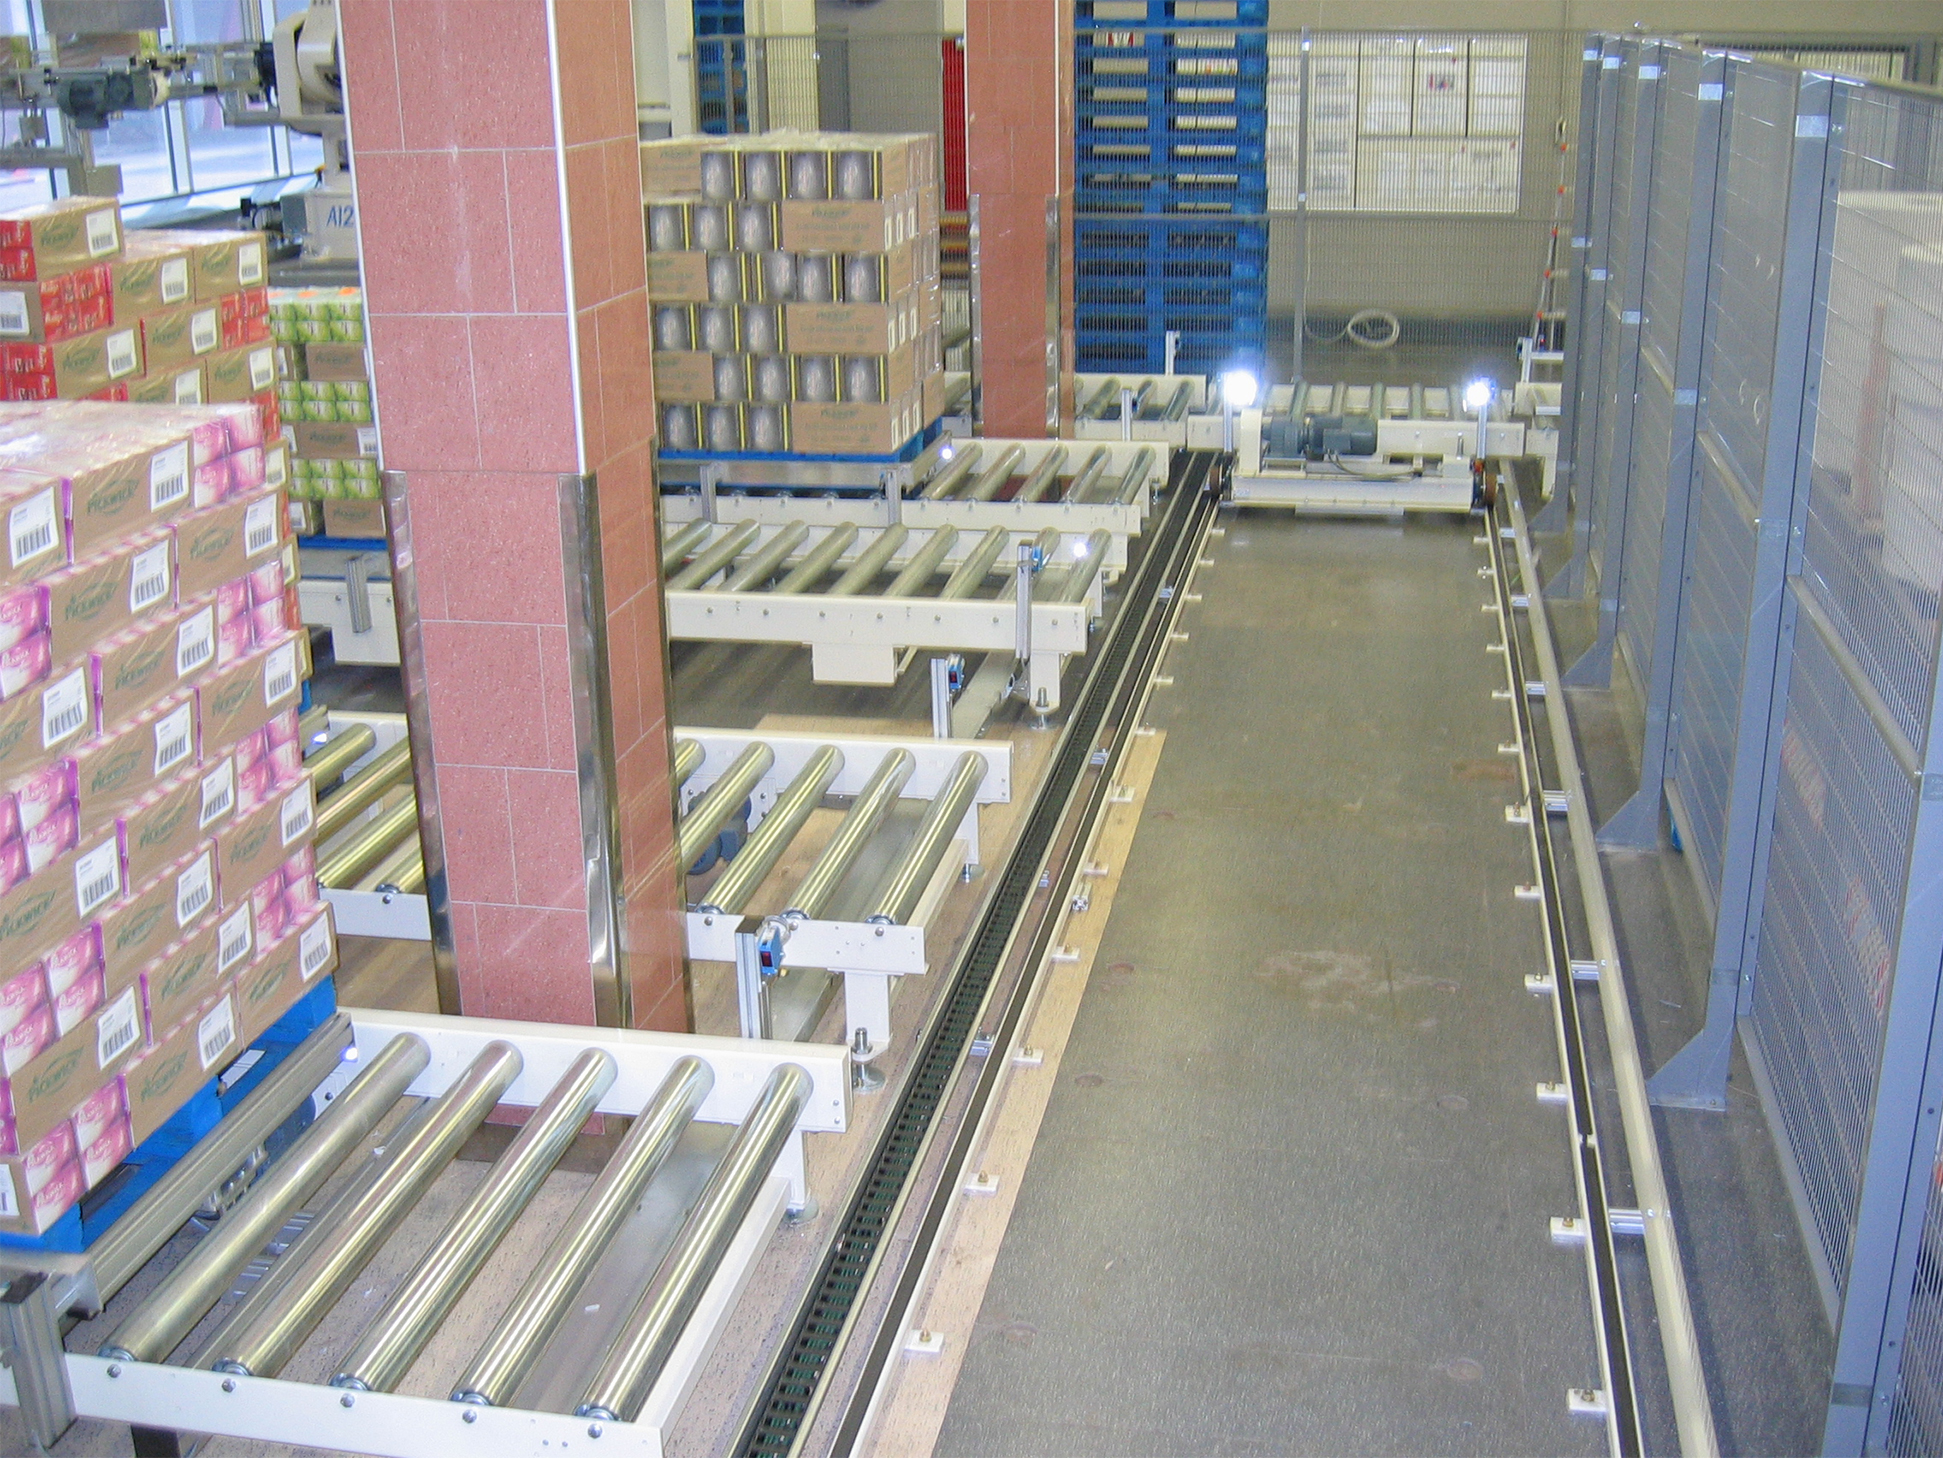 Pallet conveying components: pallet roller conveyor, shuttle wagon